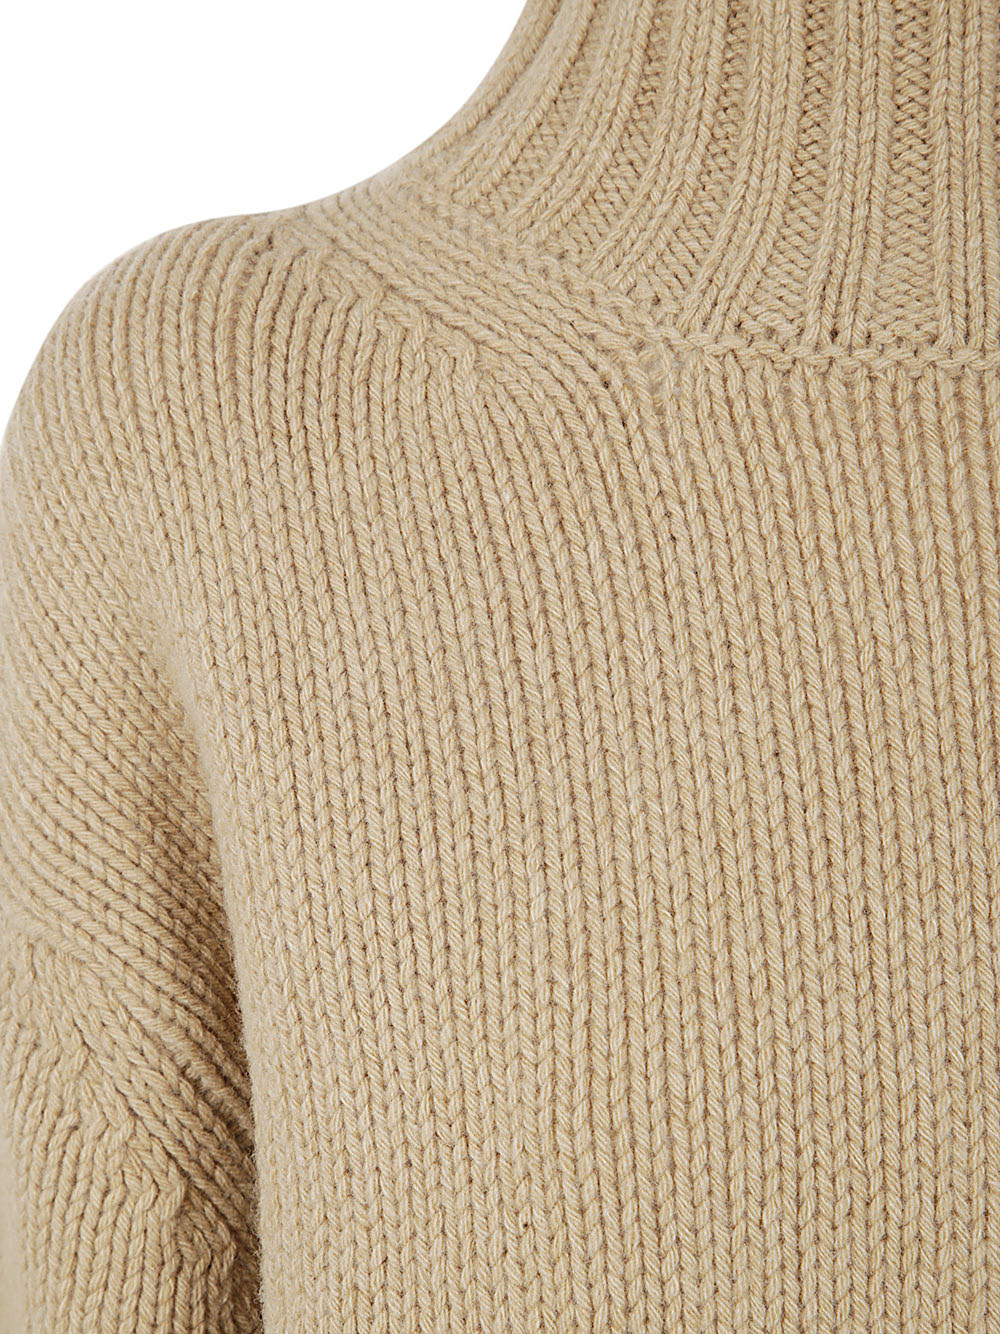 Long Sleeves Turtle Neck Sweater